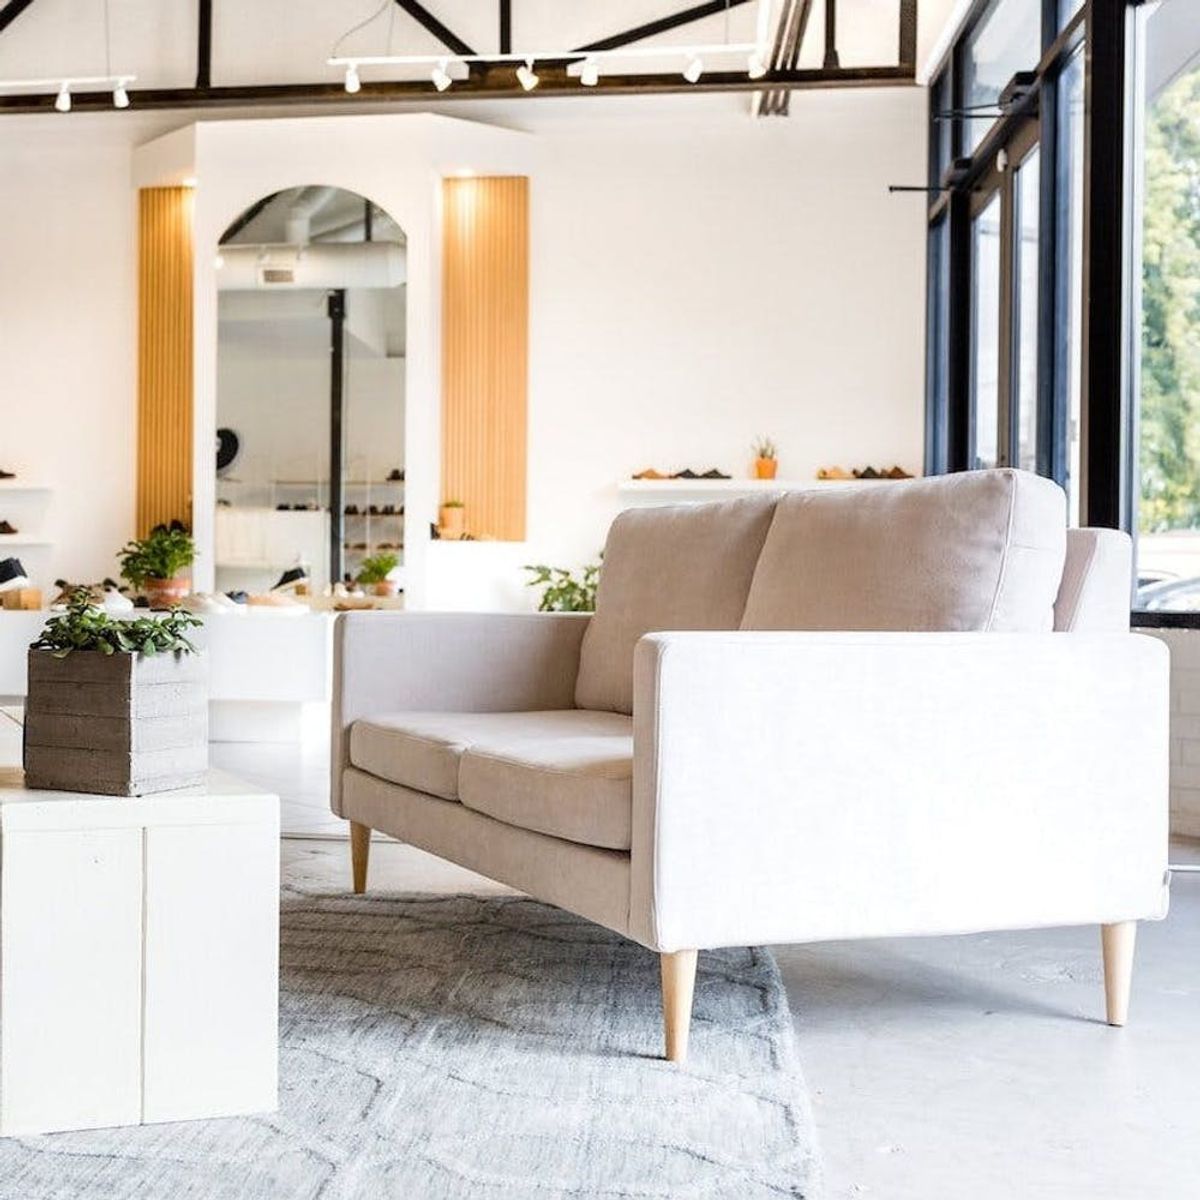 This New Furniture Line Is Making Your Move Even Easier